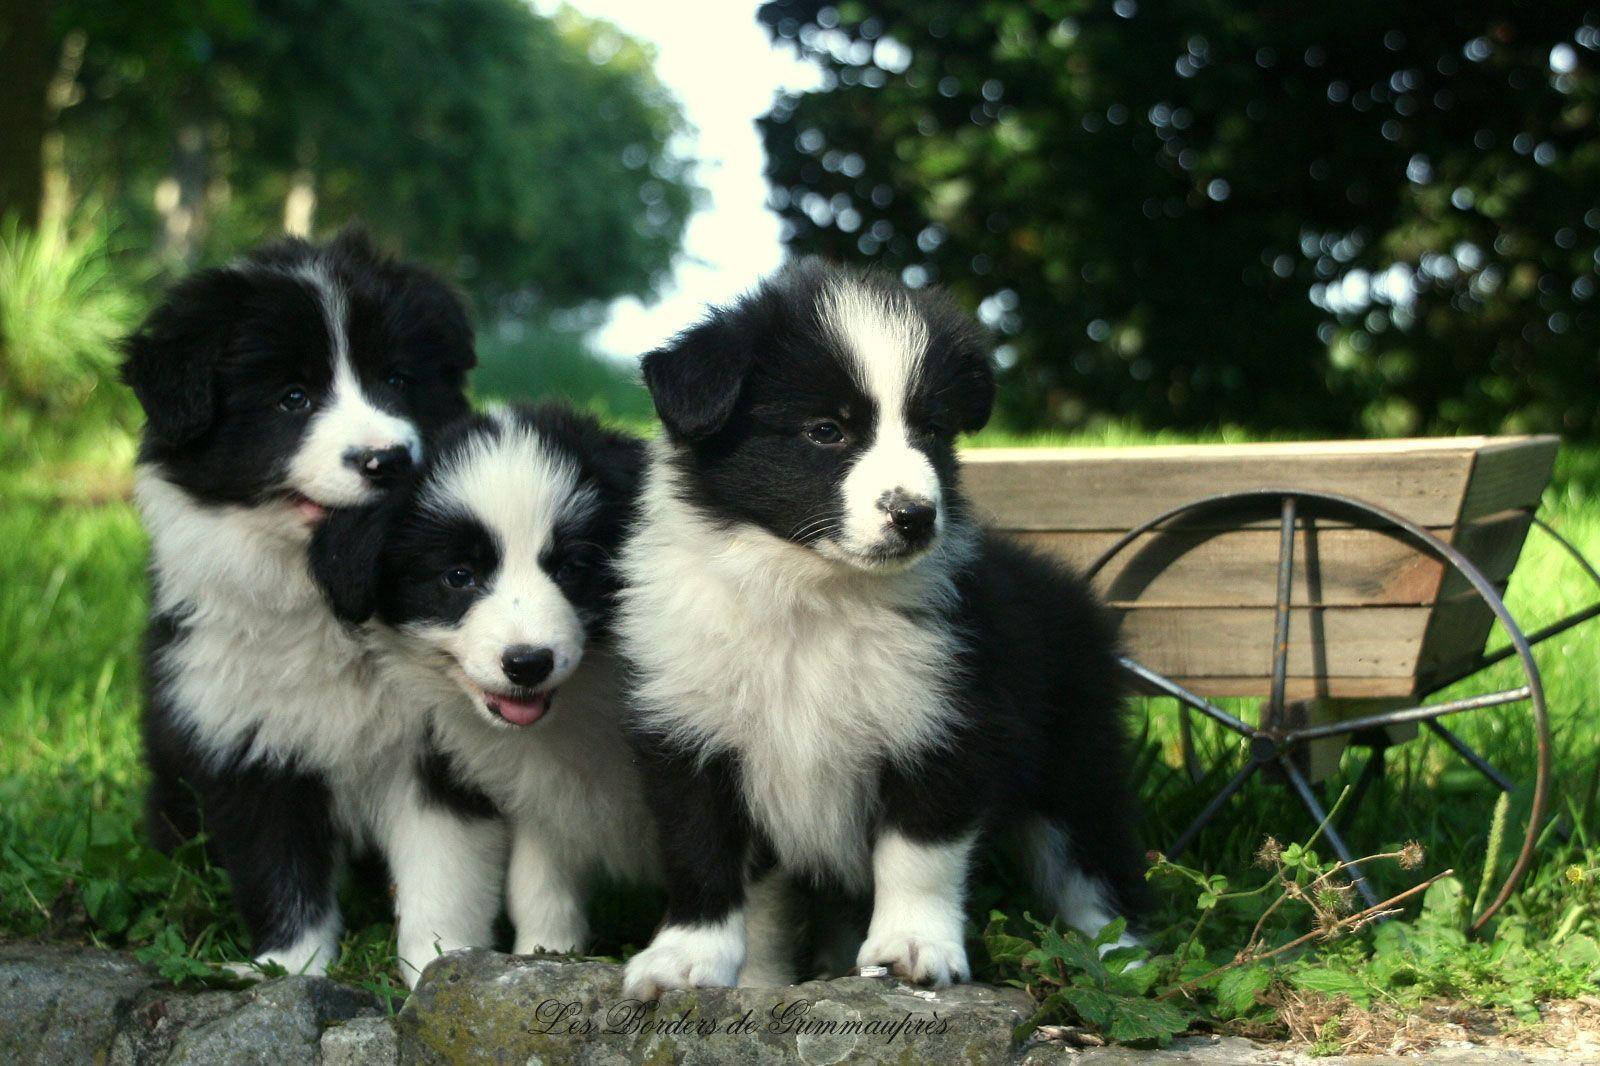  Border Collie Hintergrundbild 1600x1066. Download Alarmed Black And White Border Collie Puppy And Its Siblings Wallpaper